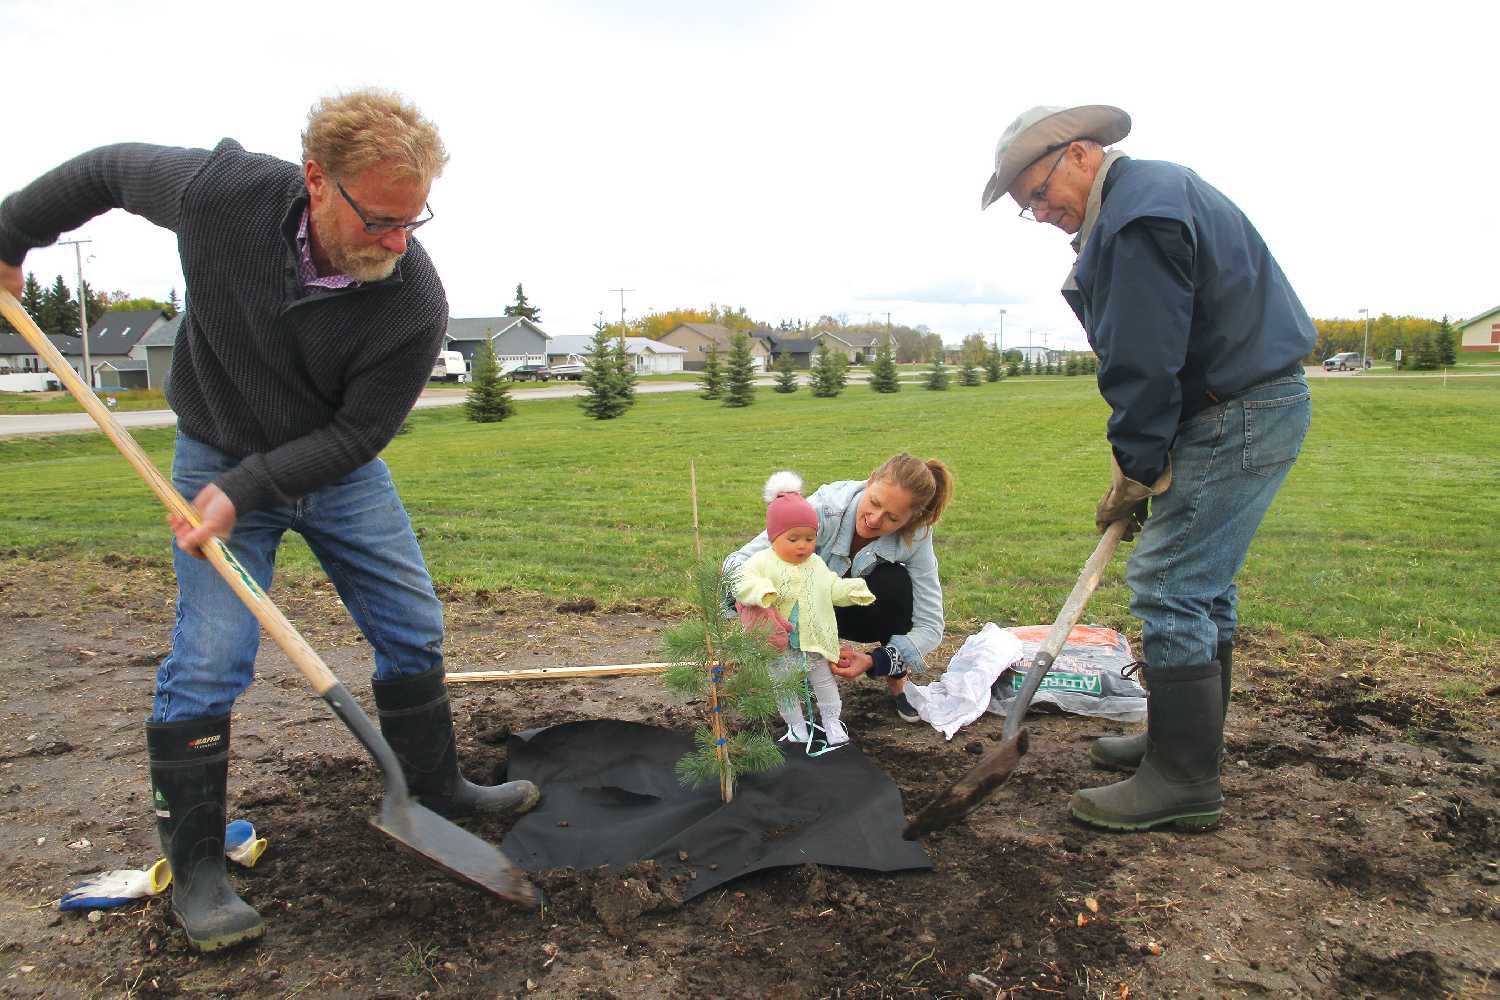 Volunteers planting trees at the South East Integrated Care Centre in 2019.